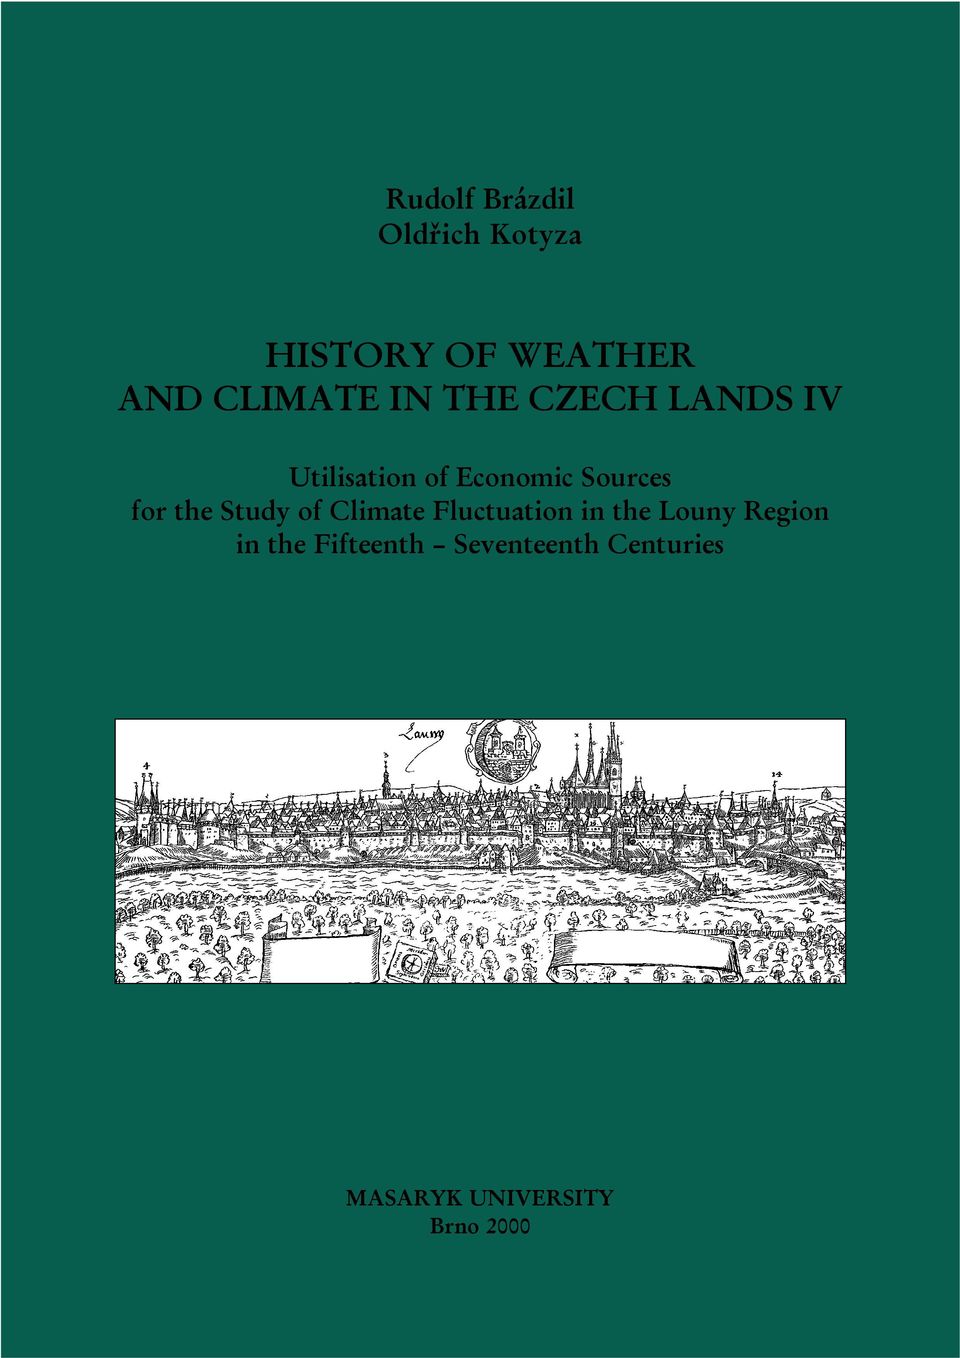 Sources for the Study of Climate Fluctuation in the Louny